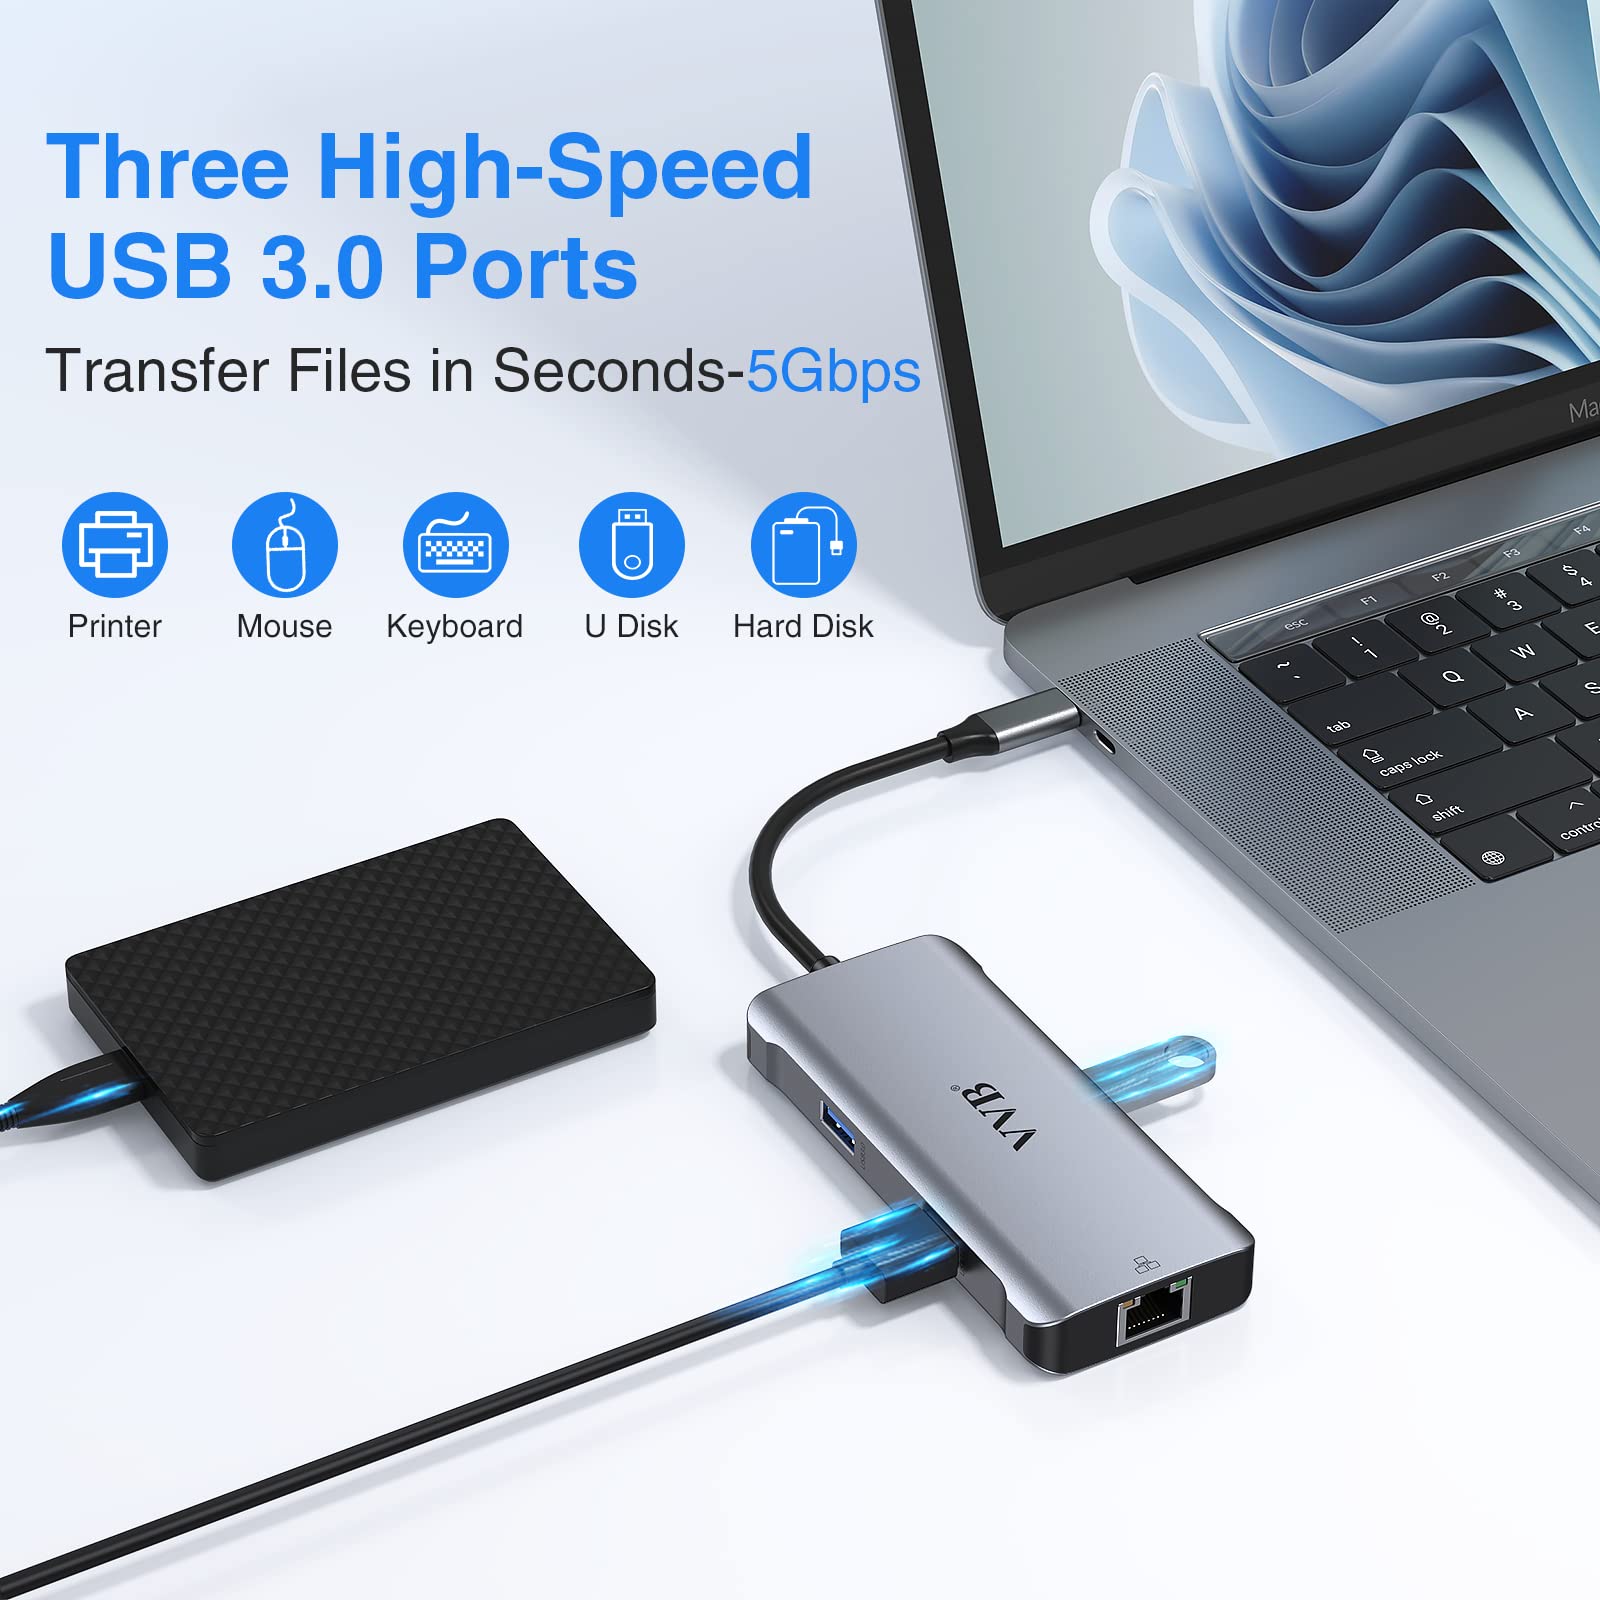 USB C Hub Multiport Adapter, USB Type C Hub to 4K HDMI,Ethernet,100W Power Passthrough,3 USB 3.0 Ports, 6 IN 1 USB-C Hub Dongle for MacBook Pro Air,Surface,Dell,HP Lenovo and More Type C Device